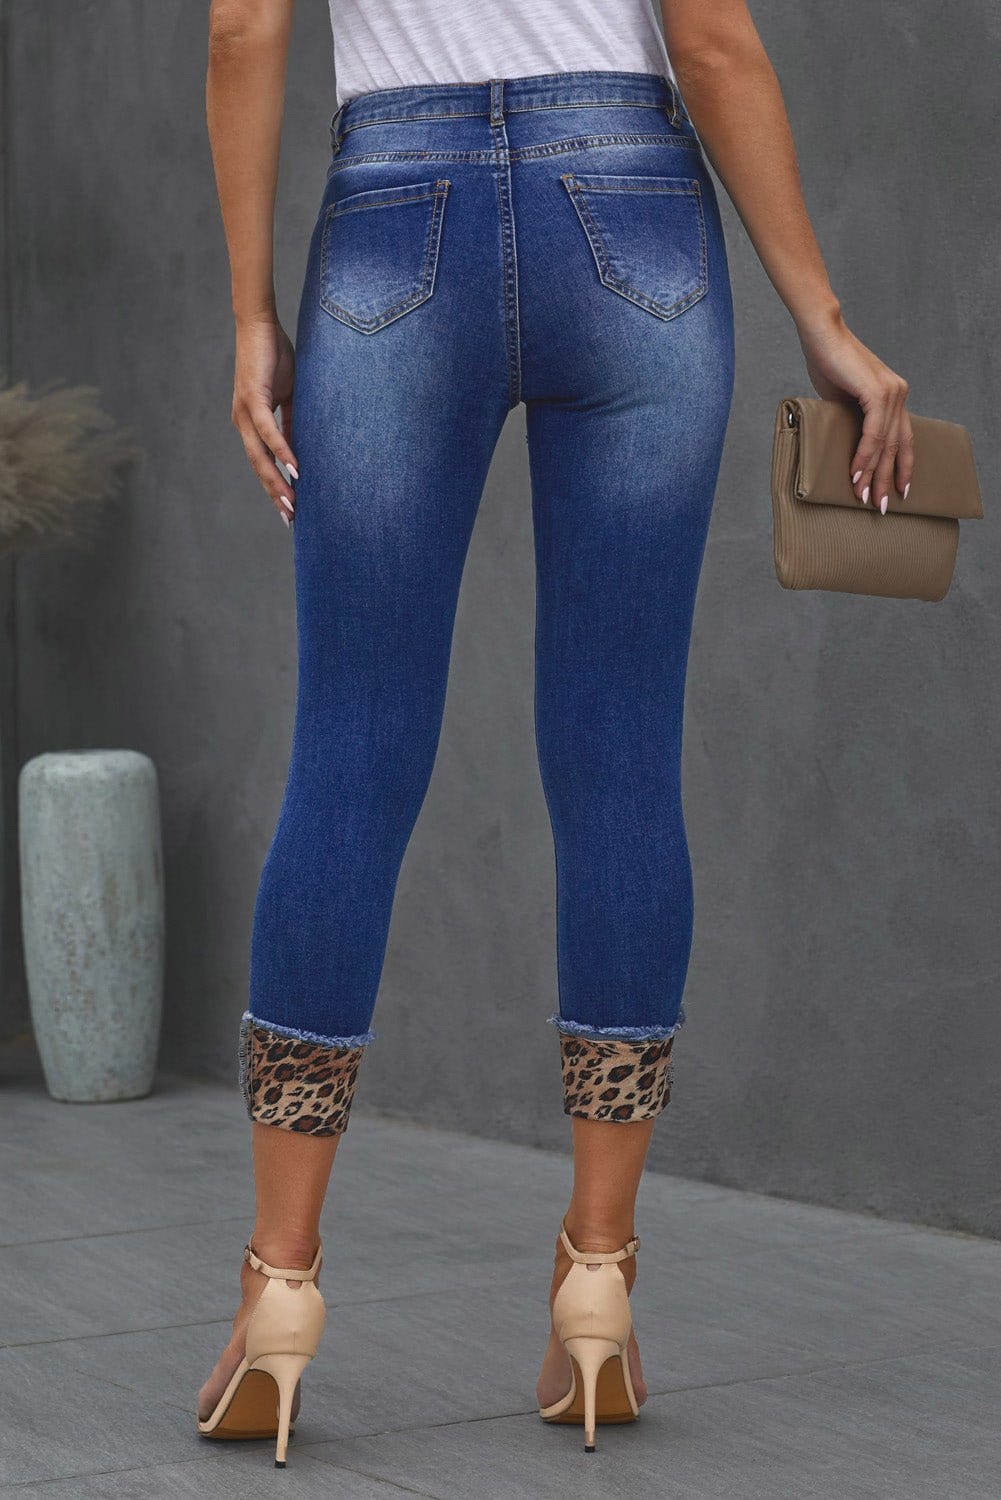 Baeful Leopard Patch Distressed Cropped Jeans - CLASSY CLOSET BOUTIQUEBaeful Leopard Patch Distressed Cropped Jeanspants100100251022713100100251022713BlueS